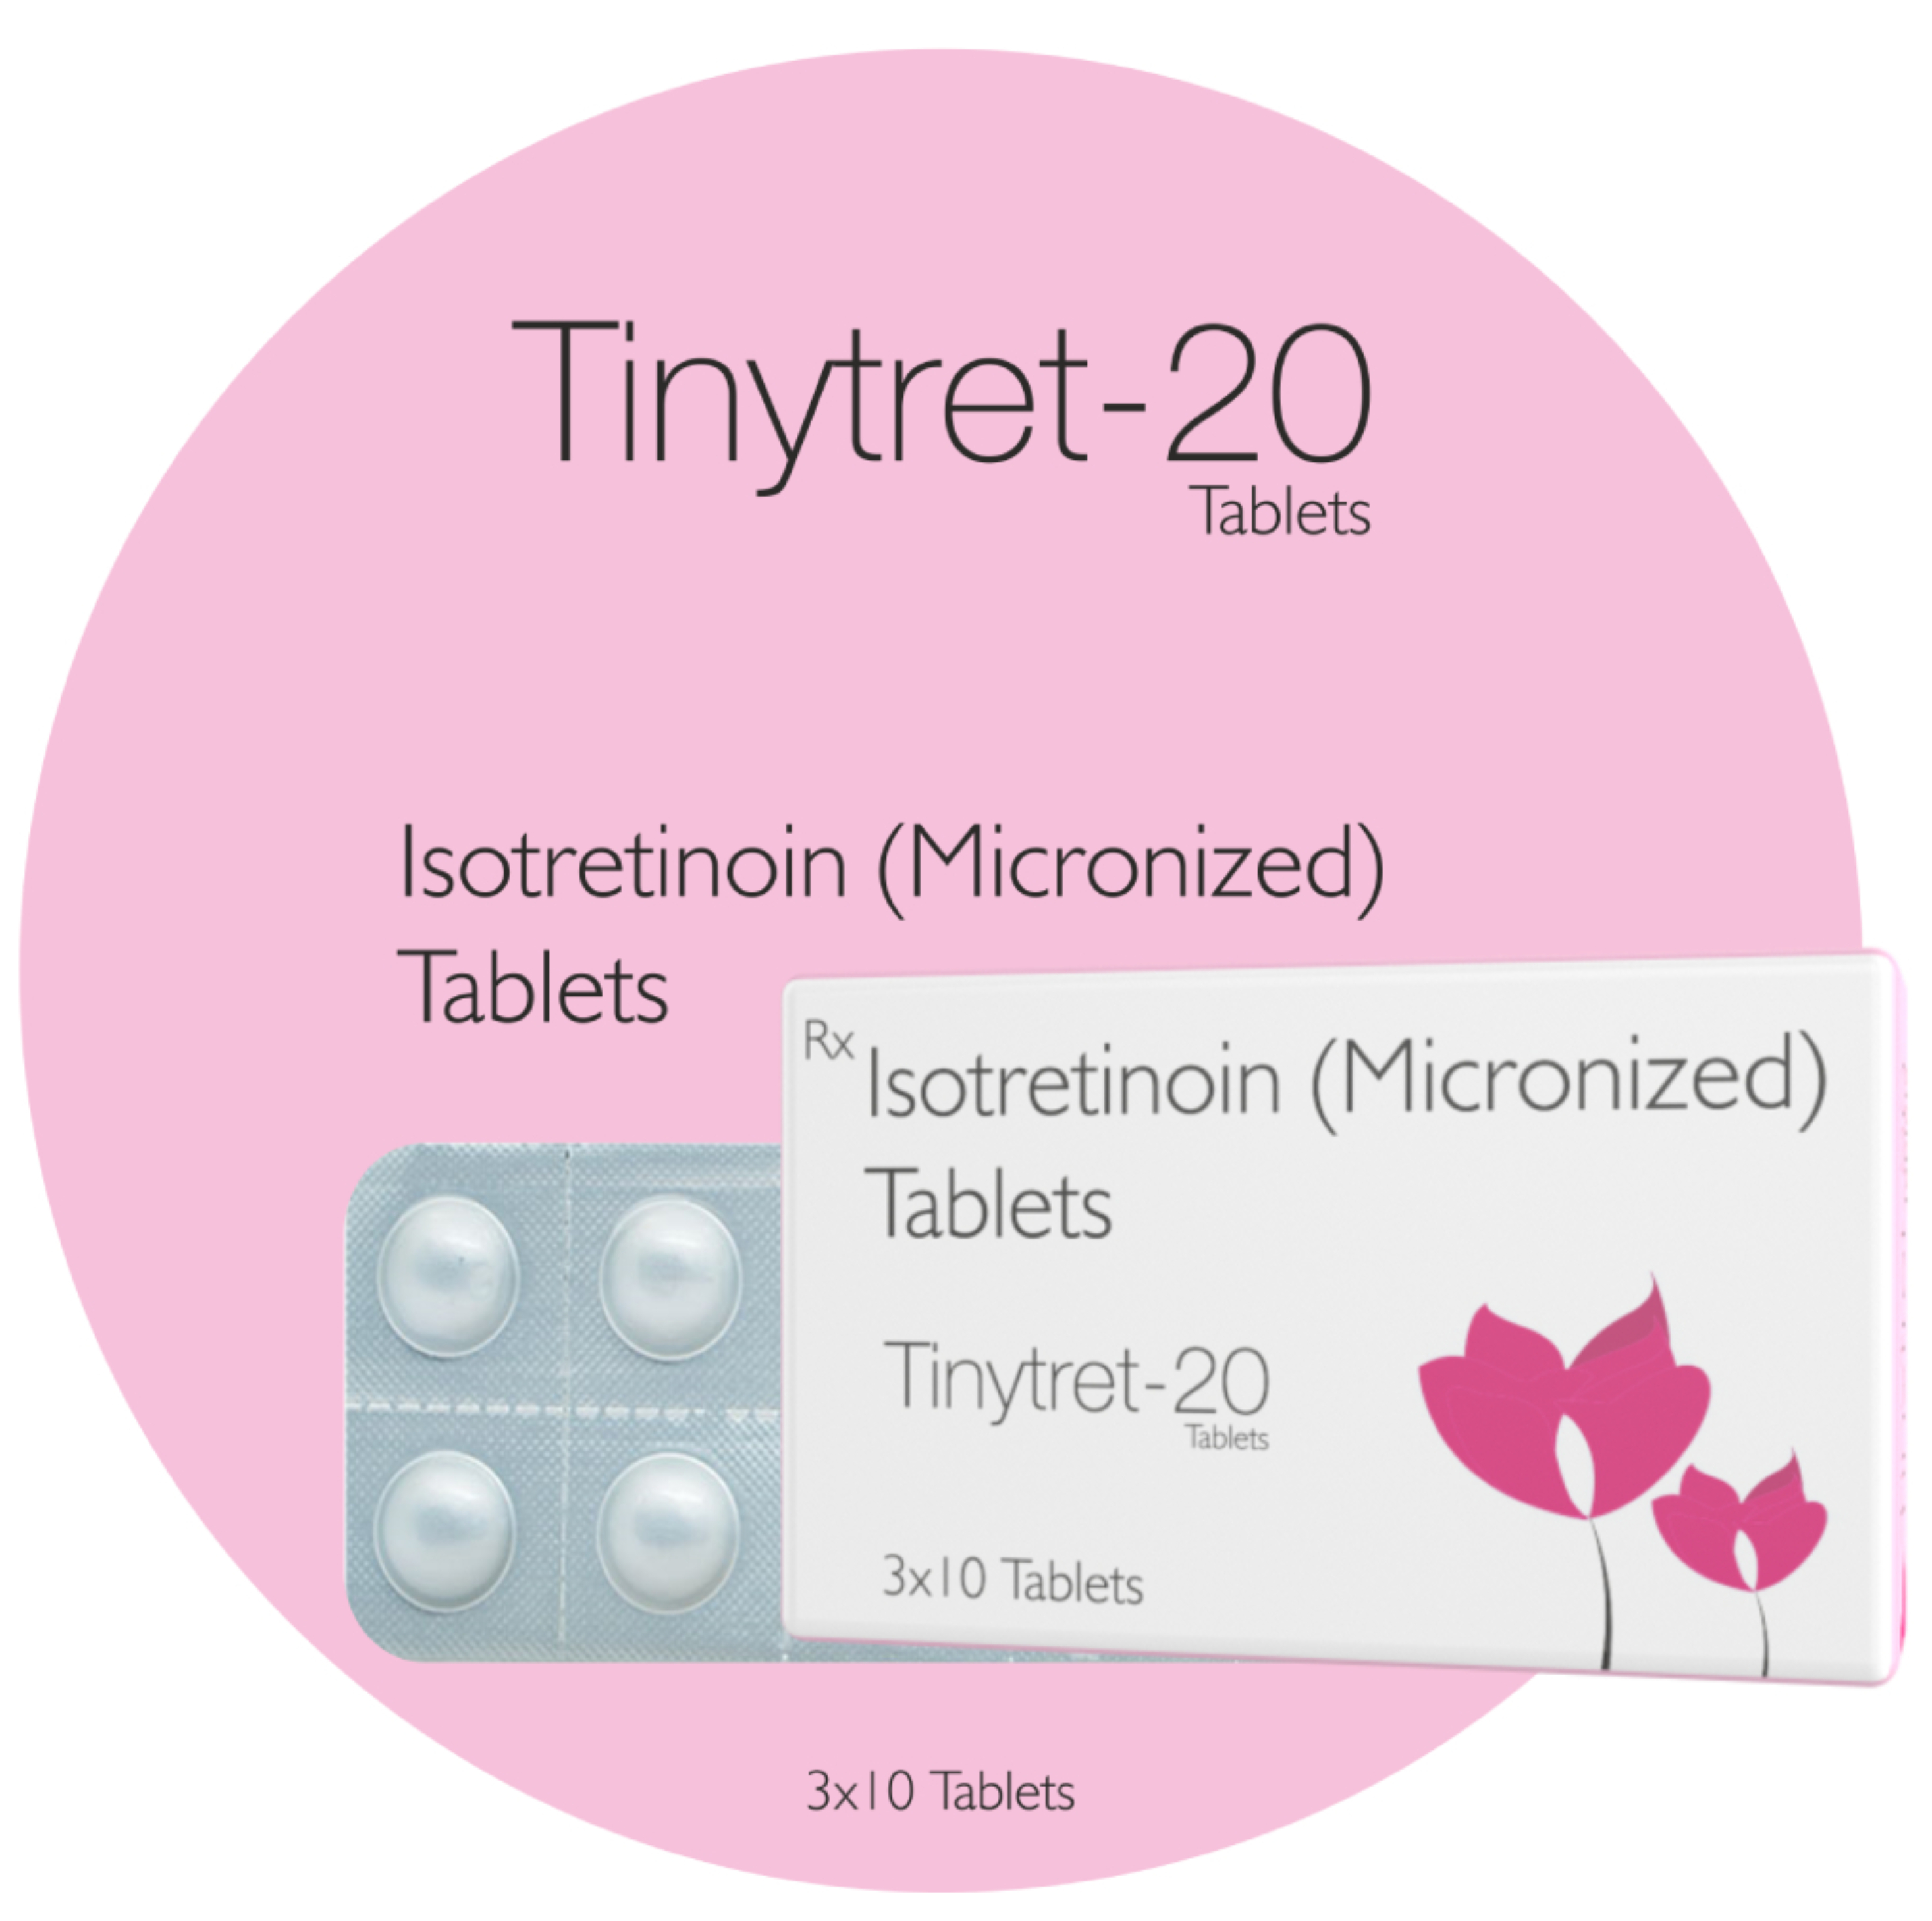 TINYTRET-20 TABLETS